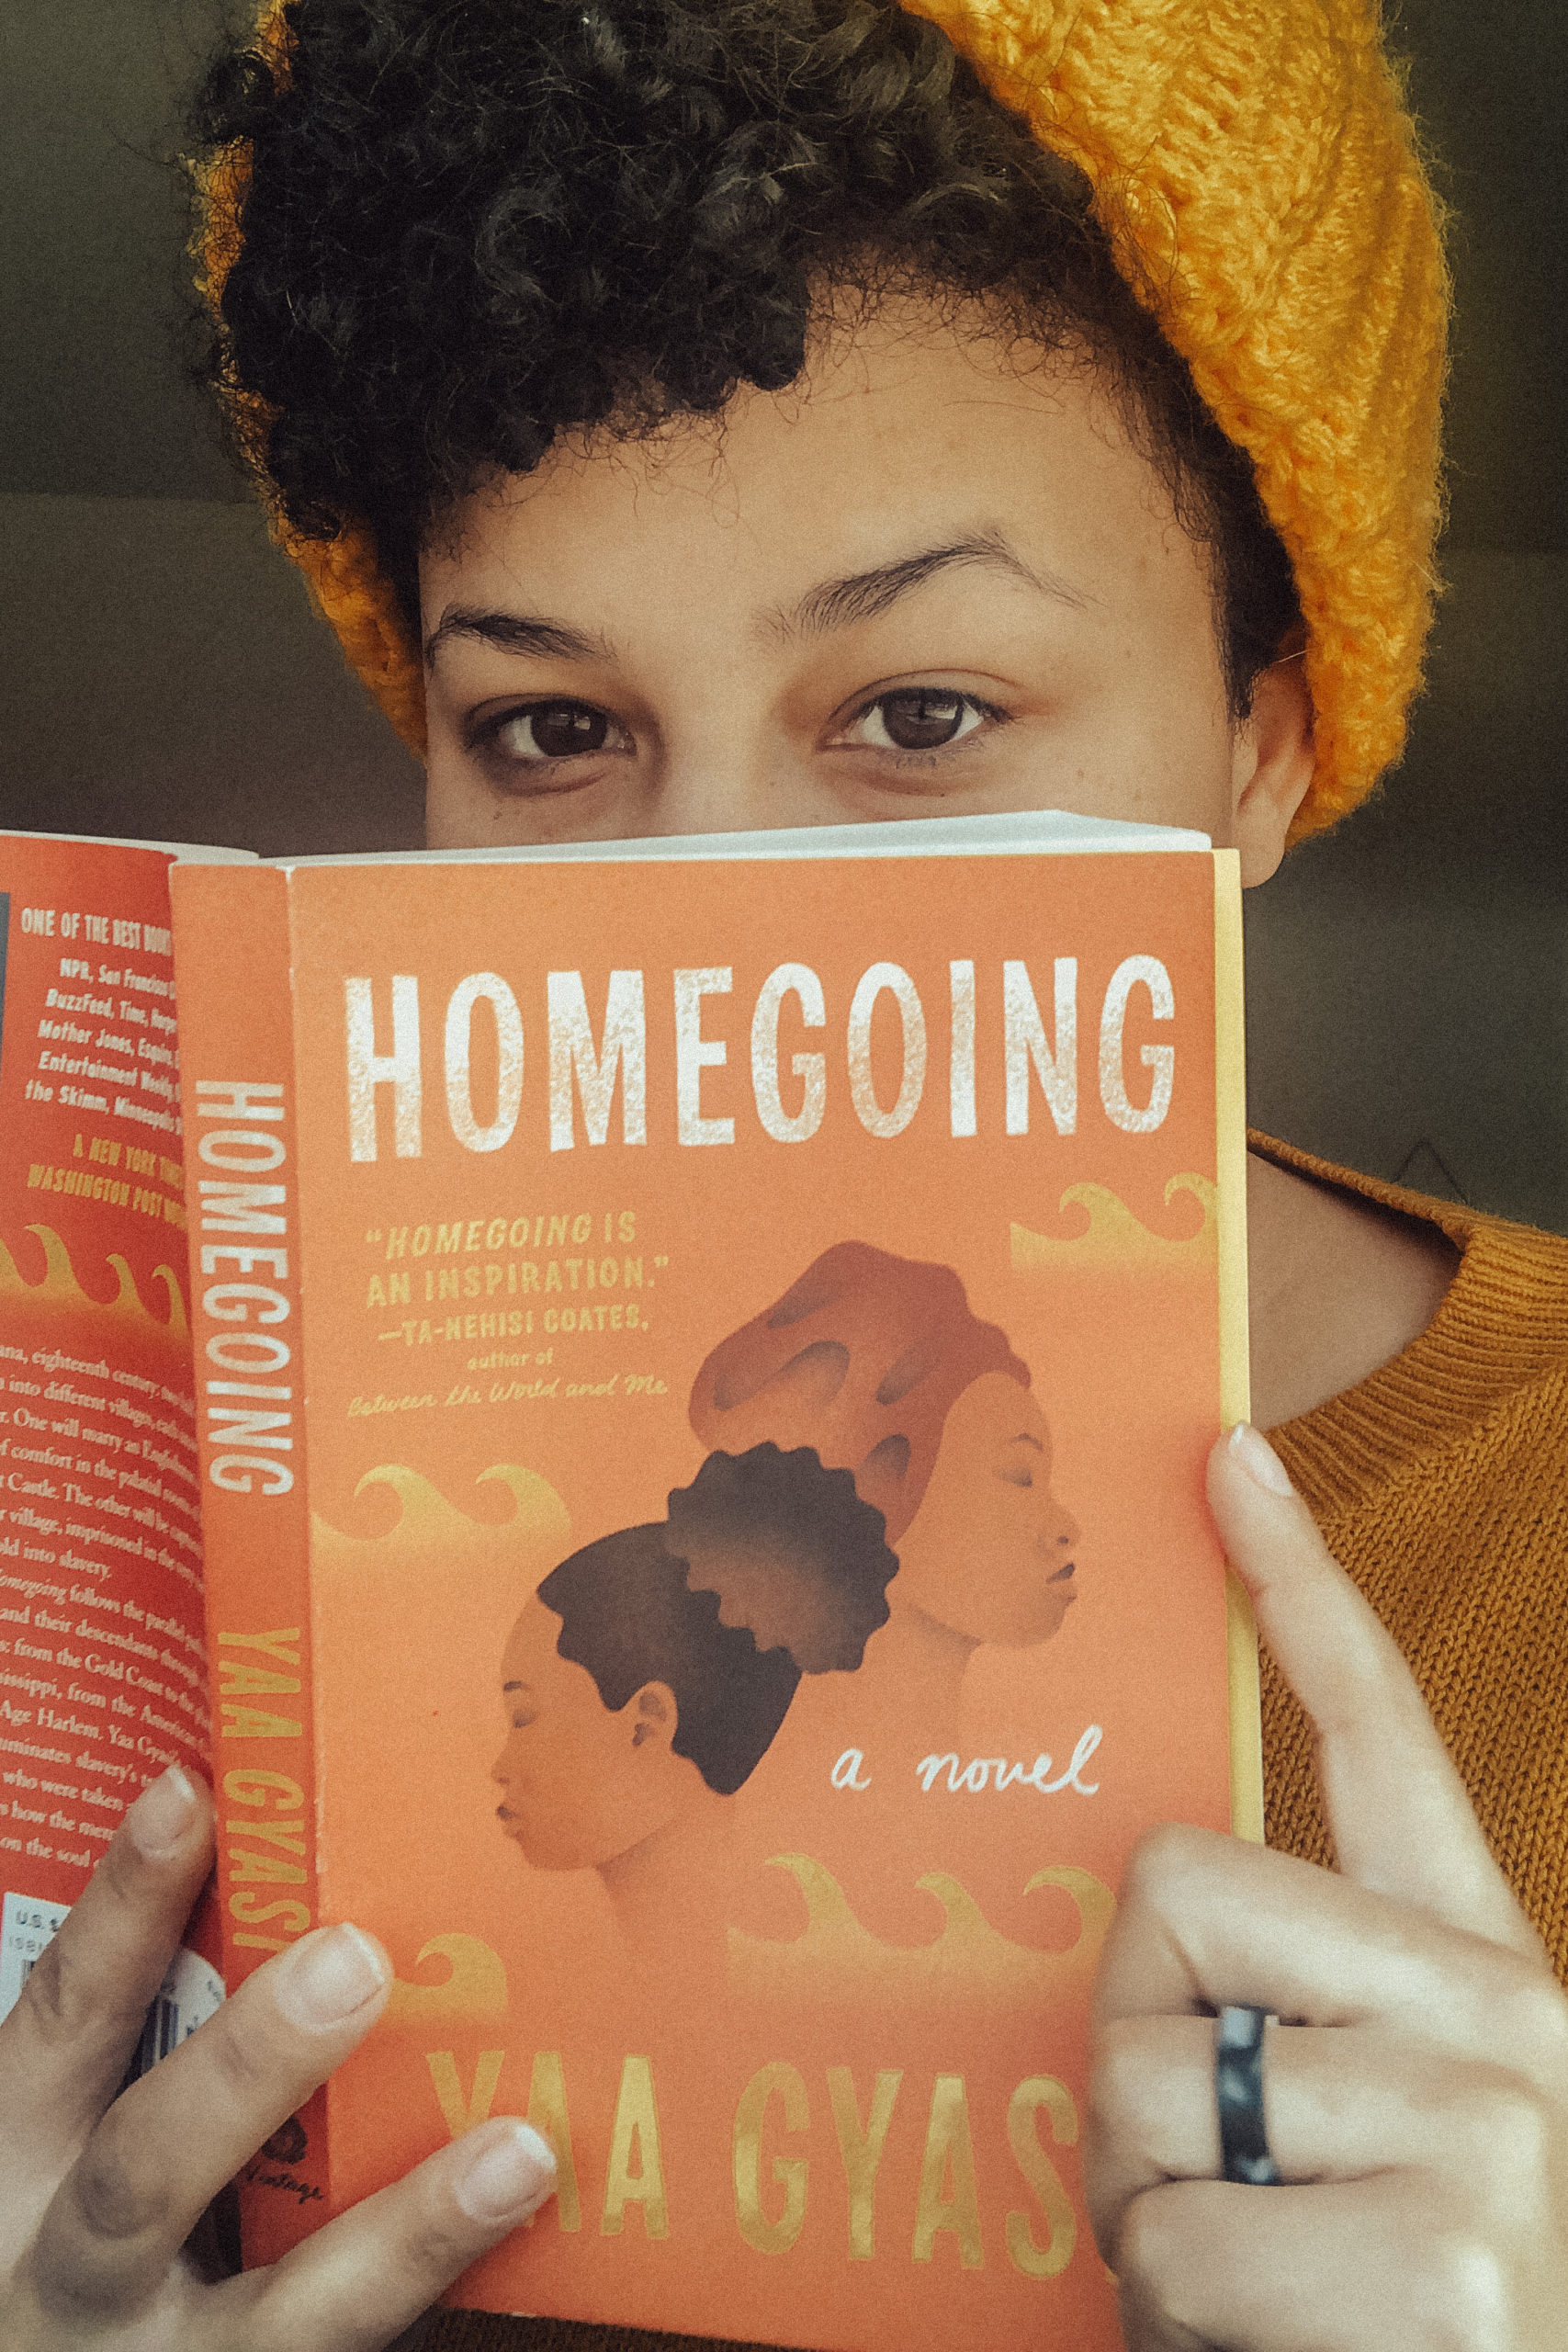 Photo of me, Emily, wearing a yellow beanie and holding the book Homegoing by Yaa Gyasi in front of my face. The book cover is red, with two Black women displayed on the front.